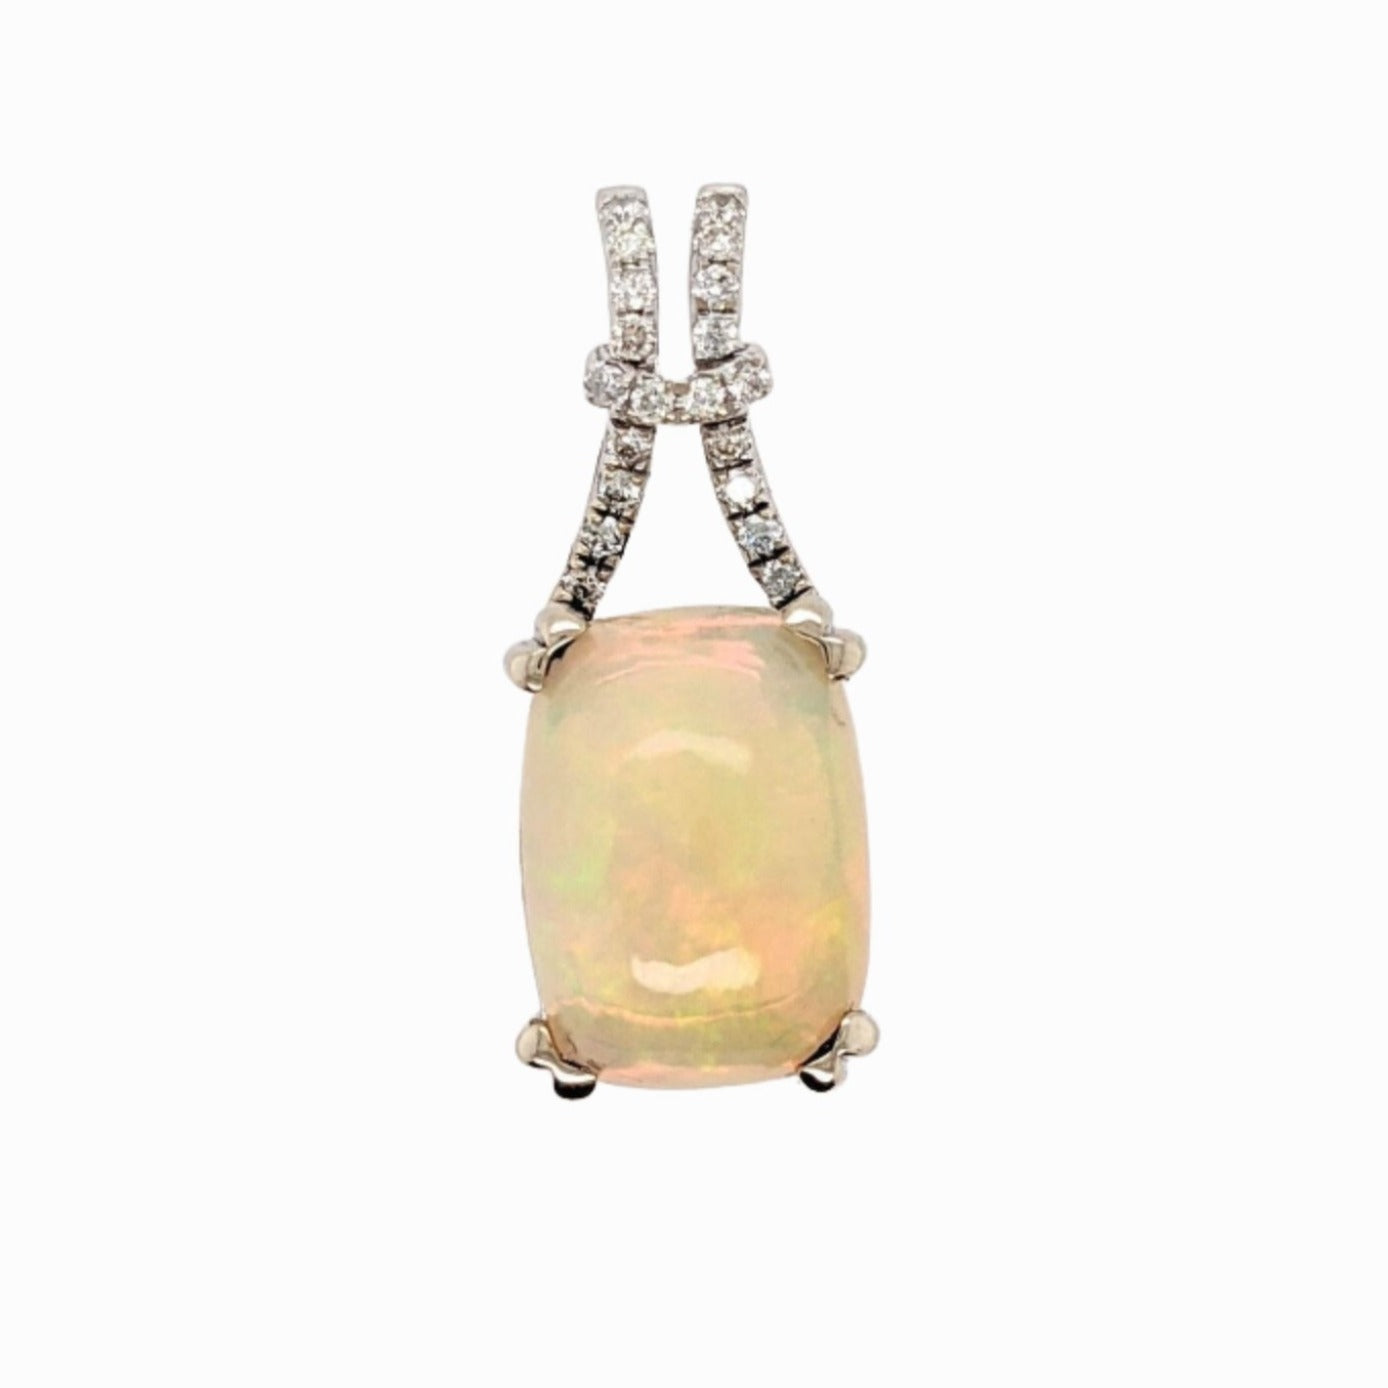 4.82ct Opal Pendant w Earth Mined Diamonds in Solid 14K White Gold Cushion 14x10